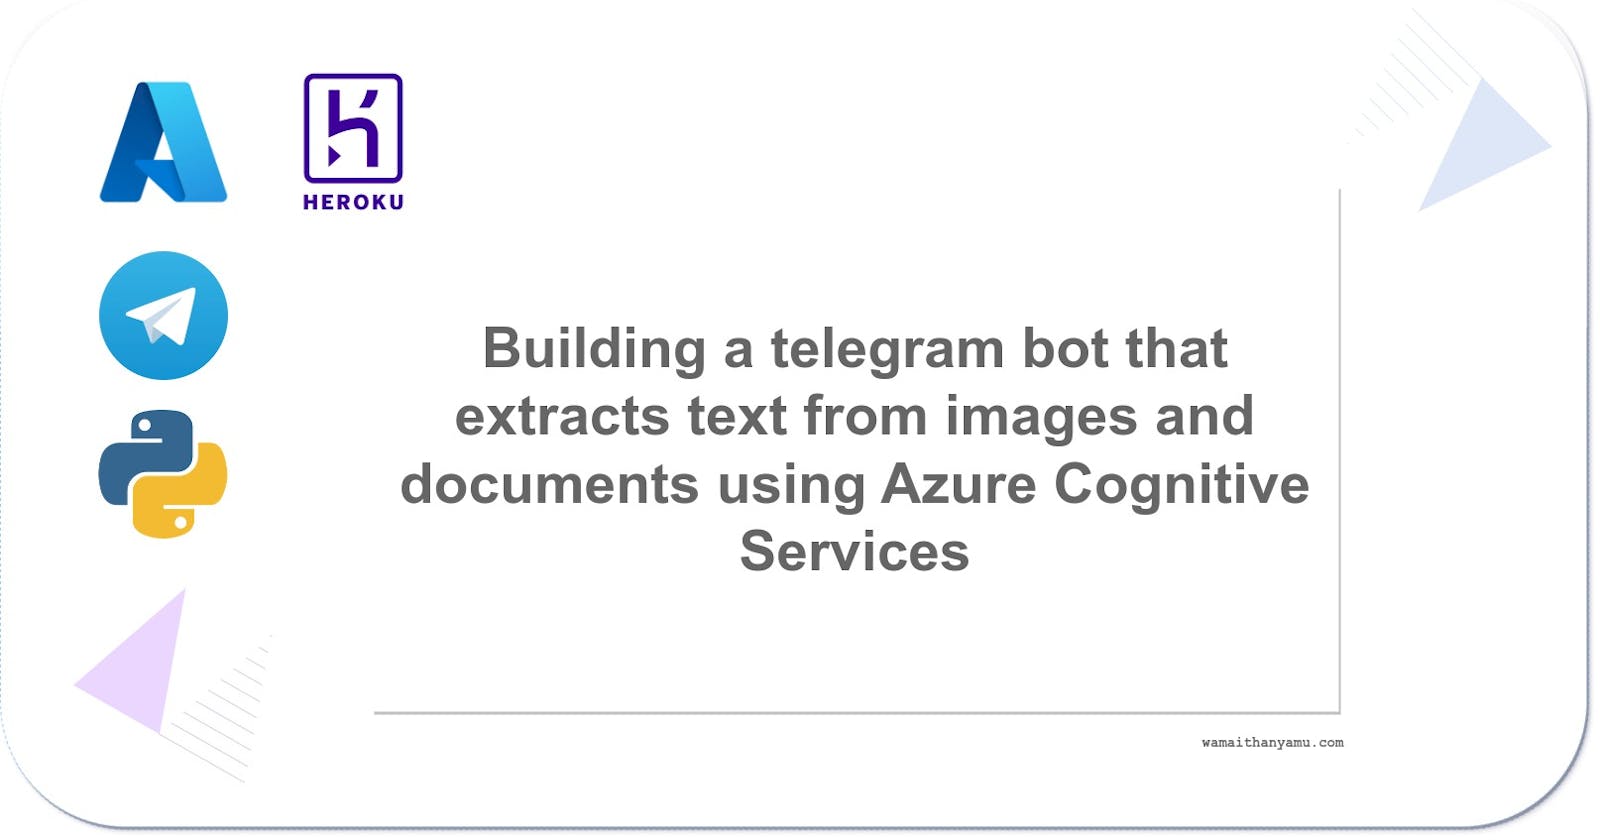 Building a telegram bot that extracts text from images and documents using Azure Cognitive Services.